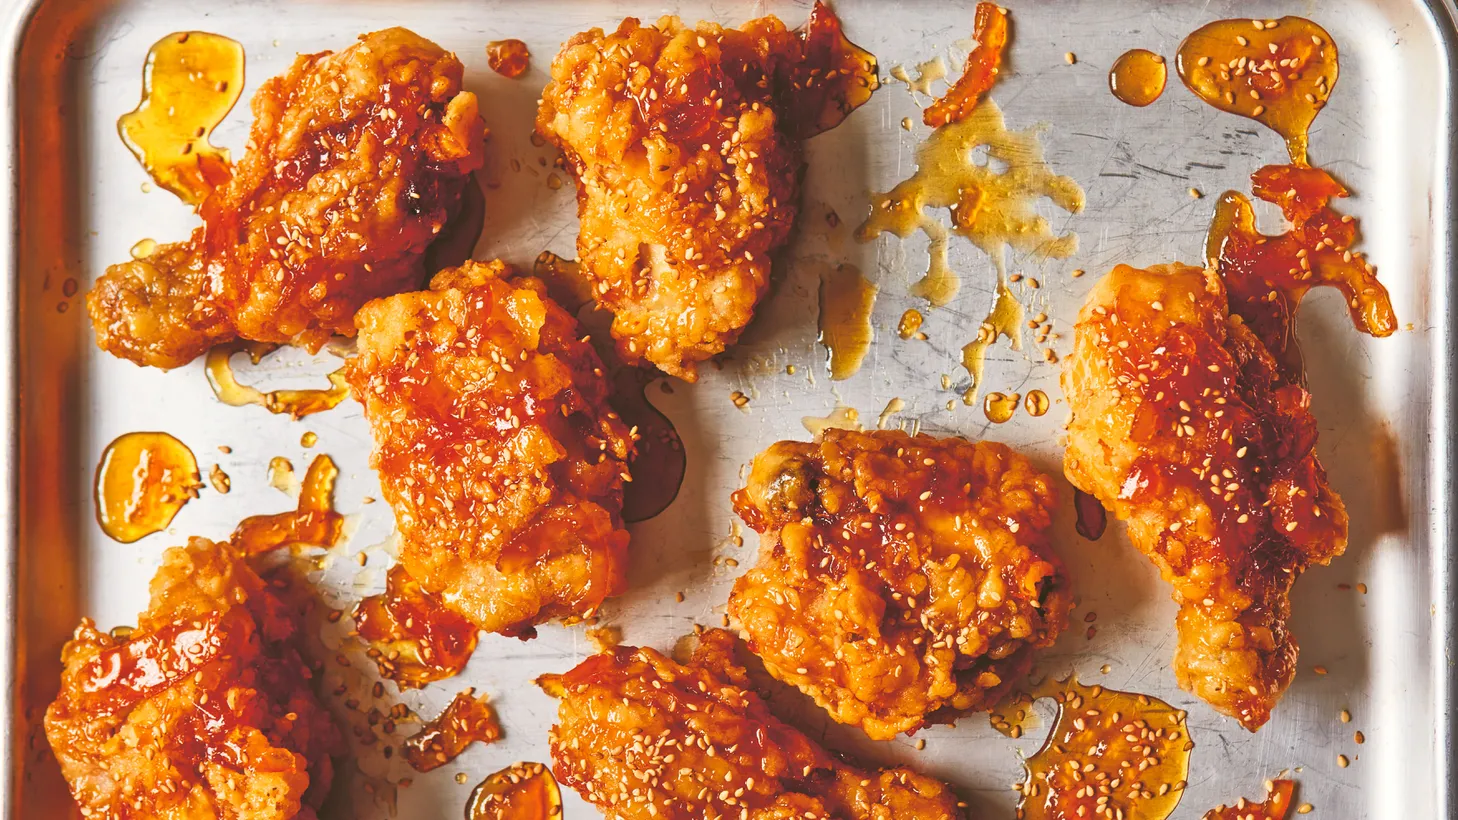 A Korean citron tea acts as a sweet-savory glaze for one of Susan Jung's fried chicken recipes.